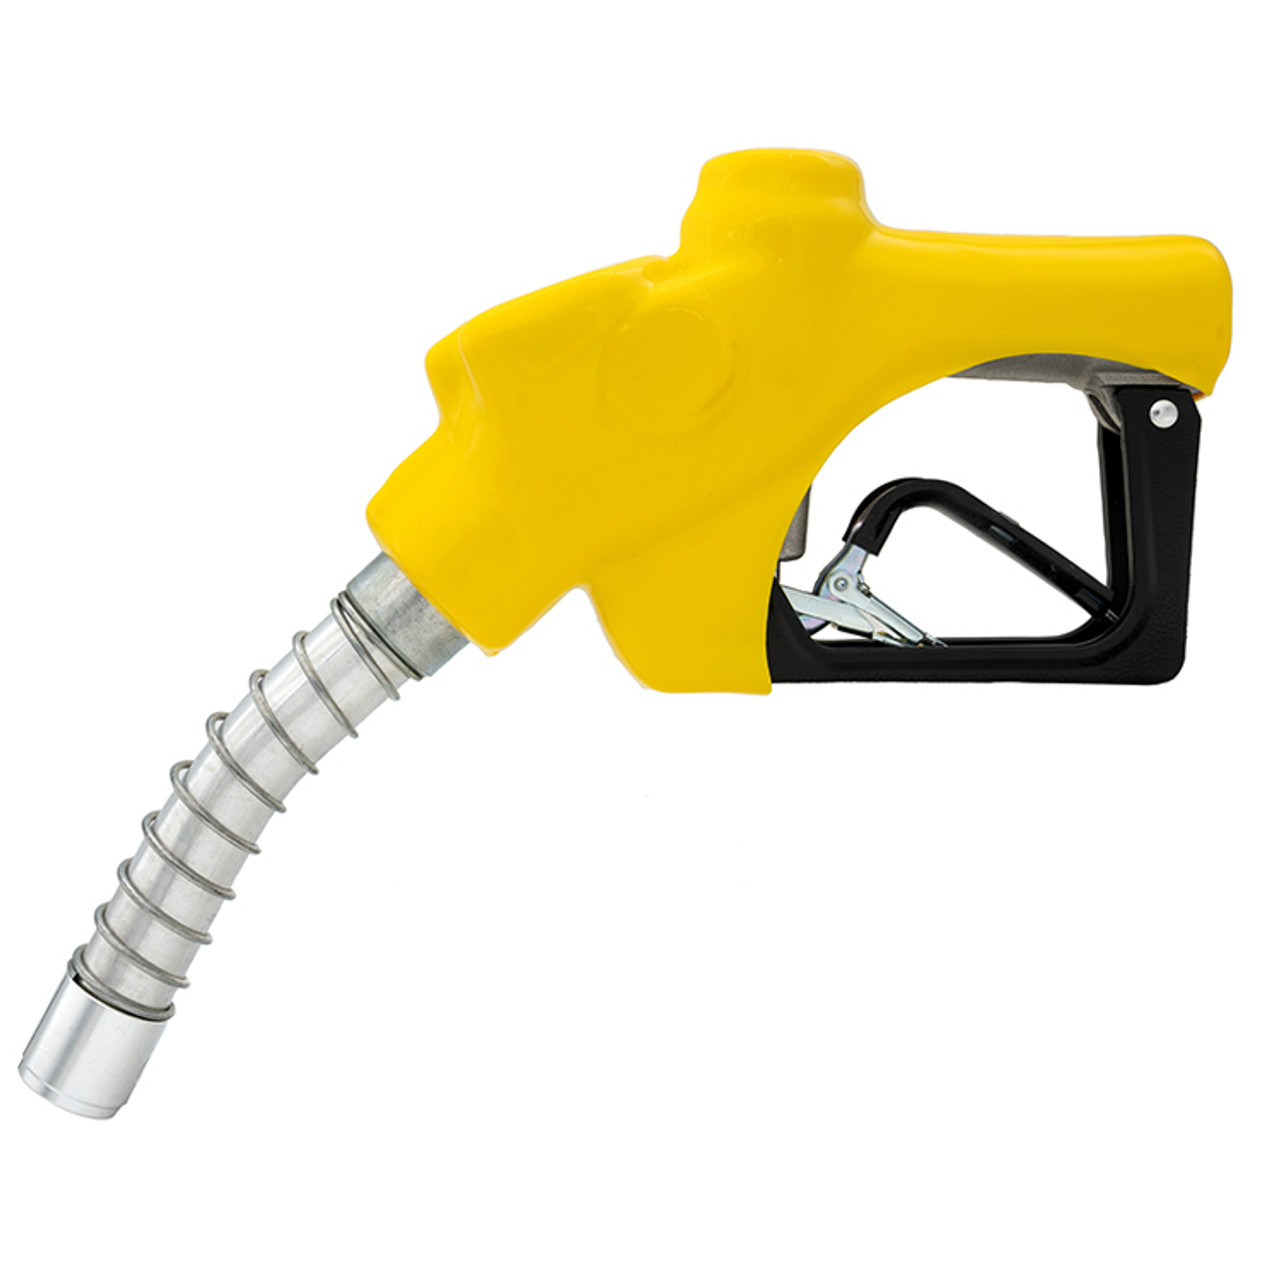 1" Unleaded Fuel Nozzle Pressure Activated w/ Hold Open Clip  G69PA-100-Y